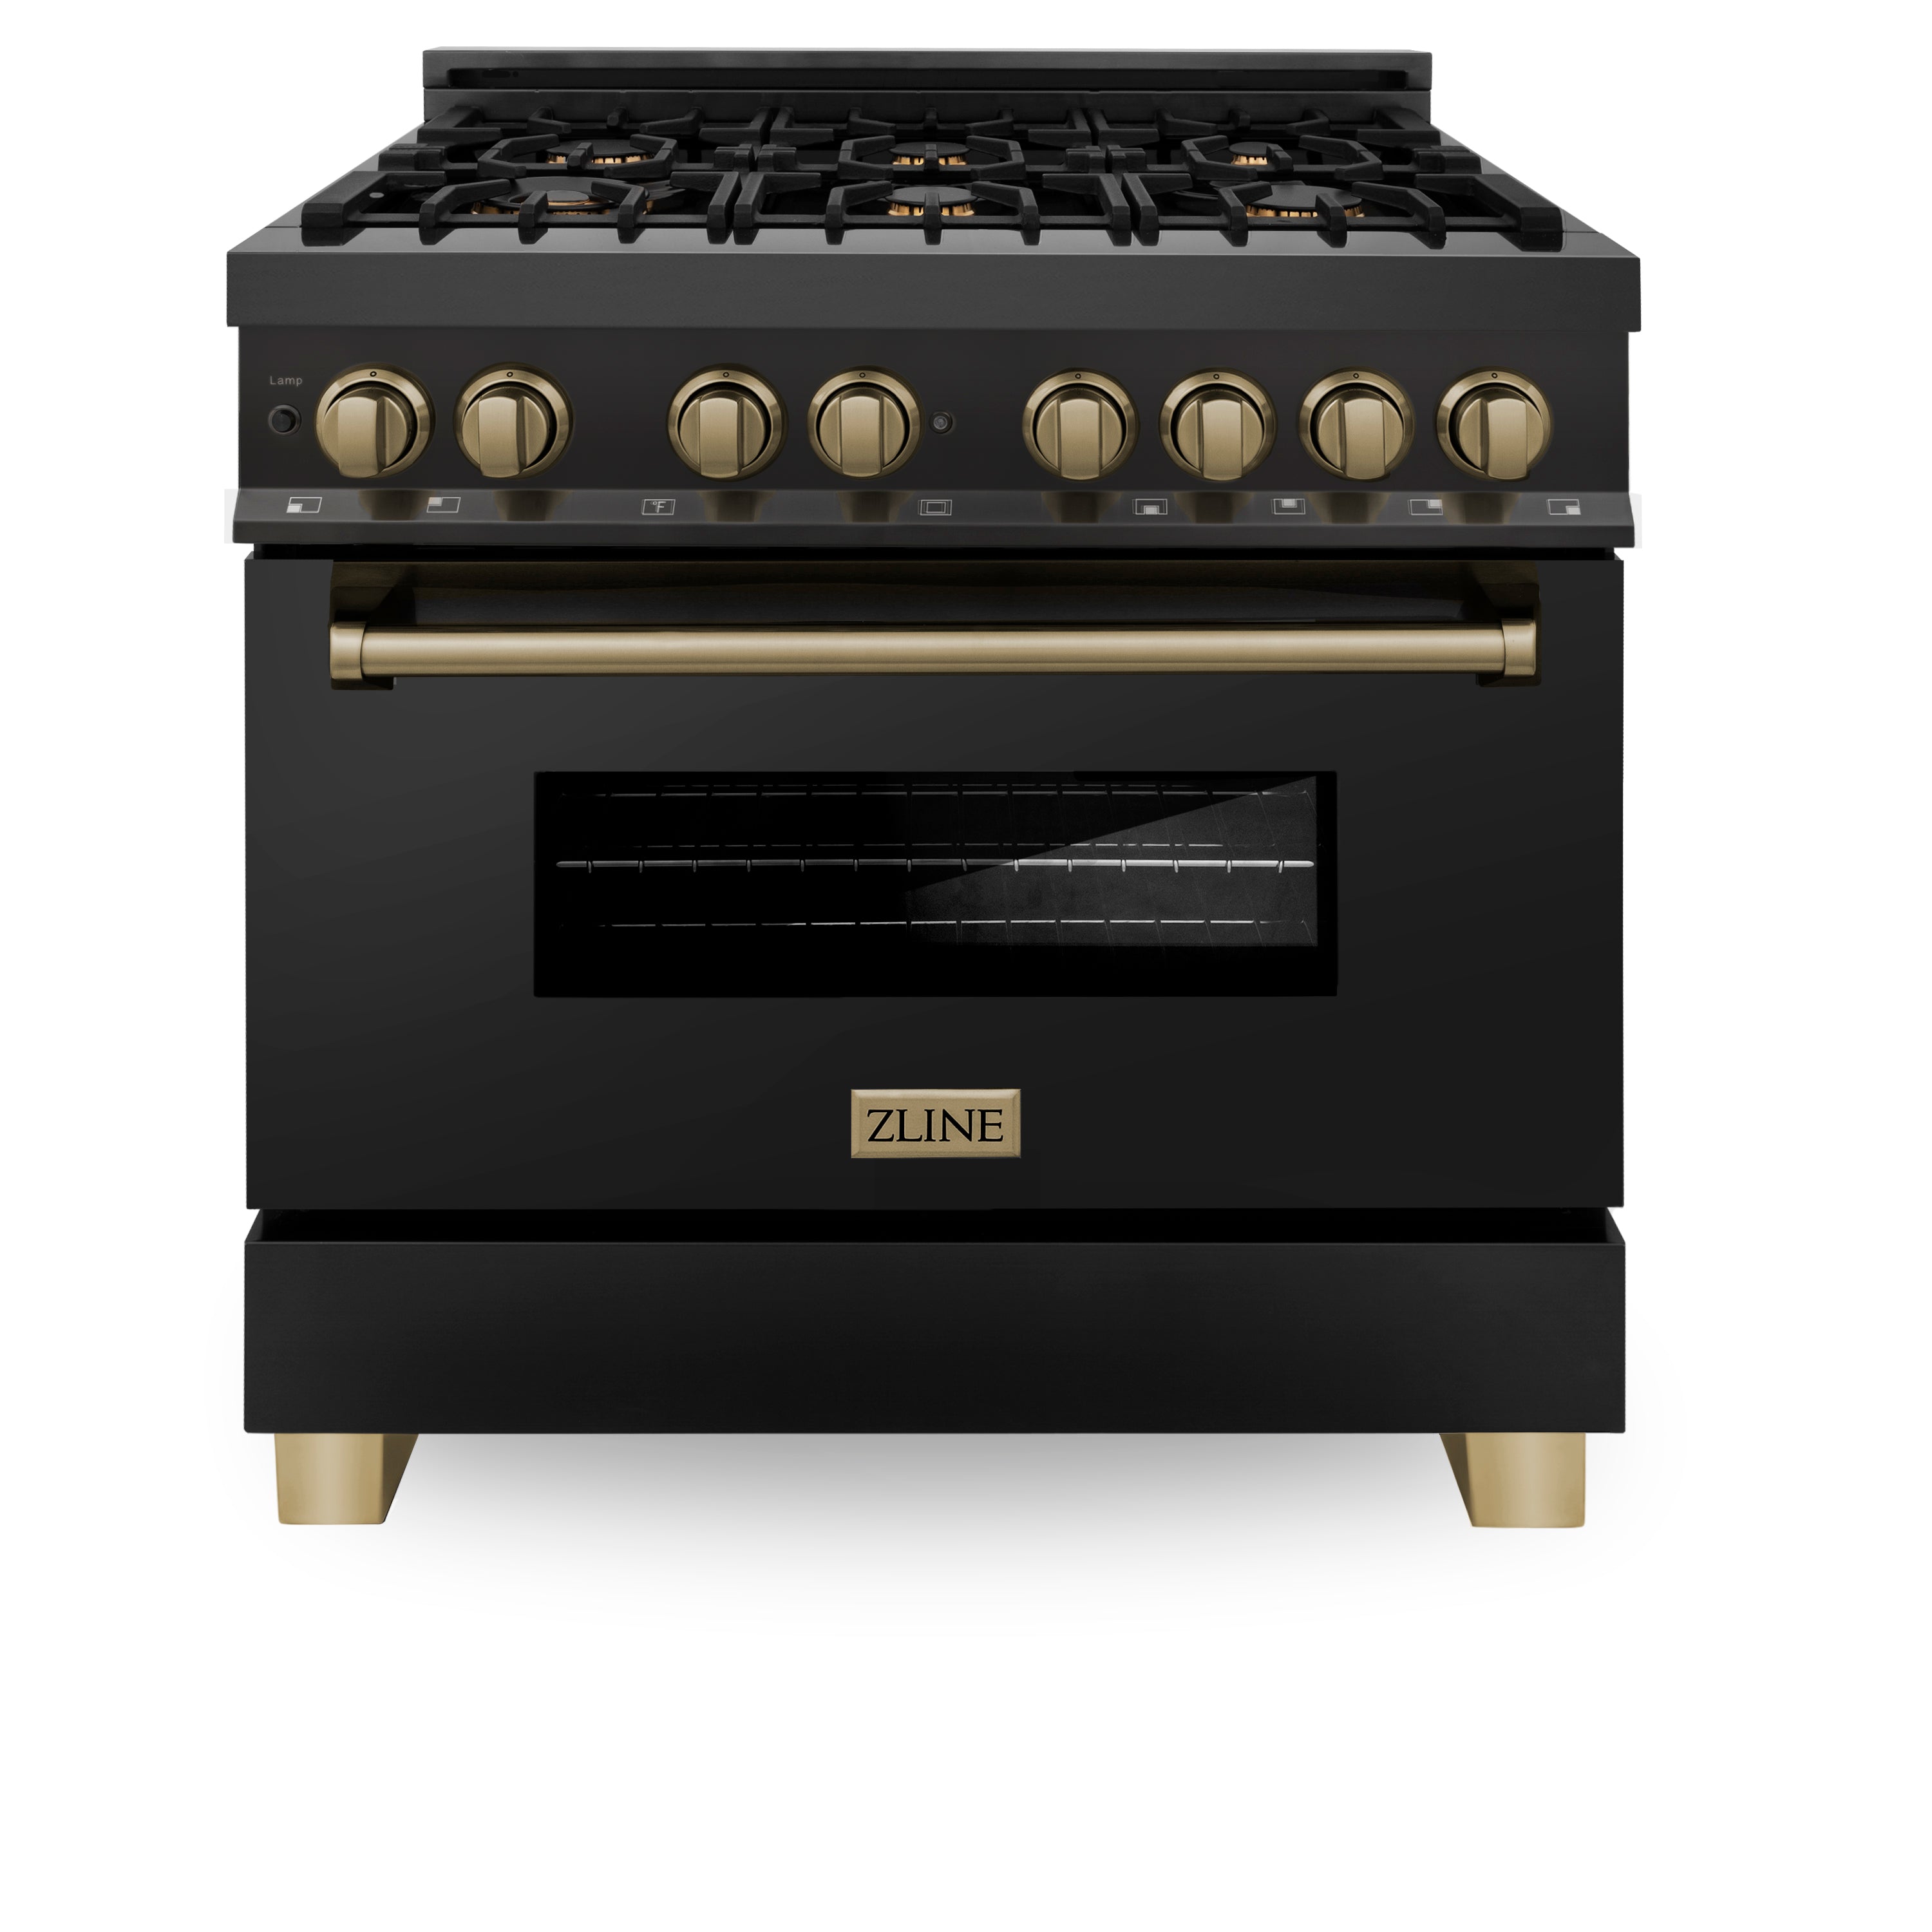 ZLINE Autograph Edition 36" 4.6 cu. ft. Dual Fuel Range with Gas Stove and Electric Oven in Black Stainless Steel with Accents (RABZ-36)